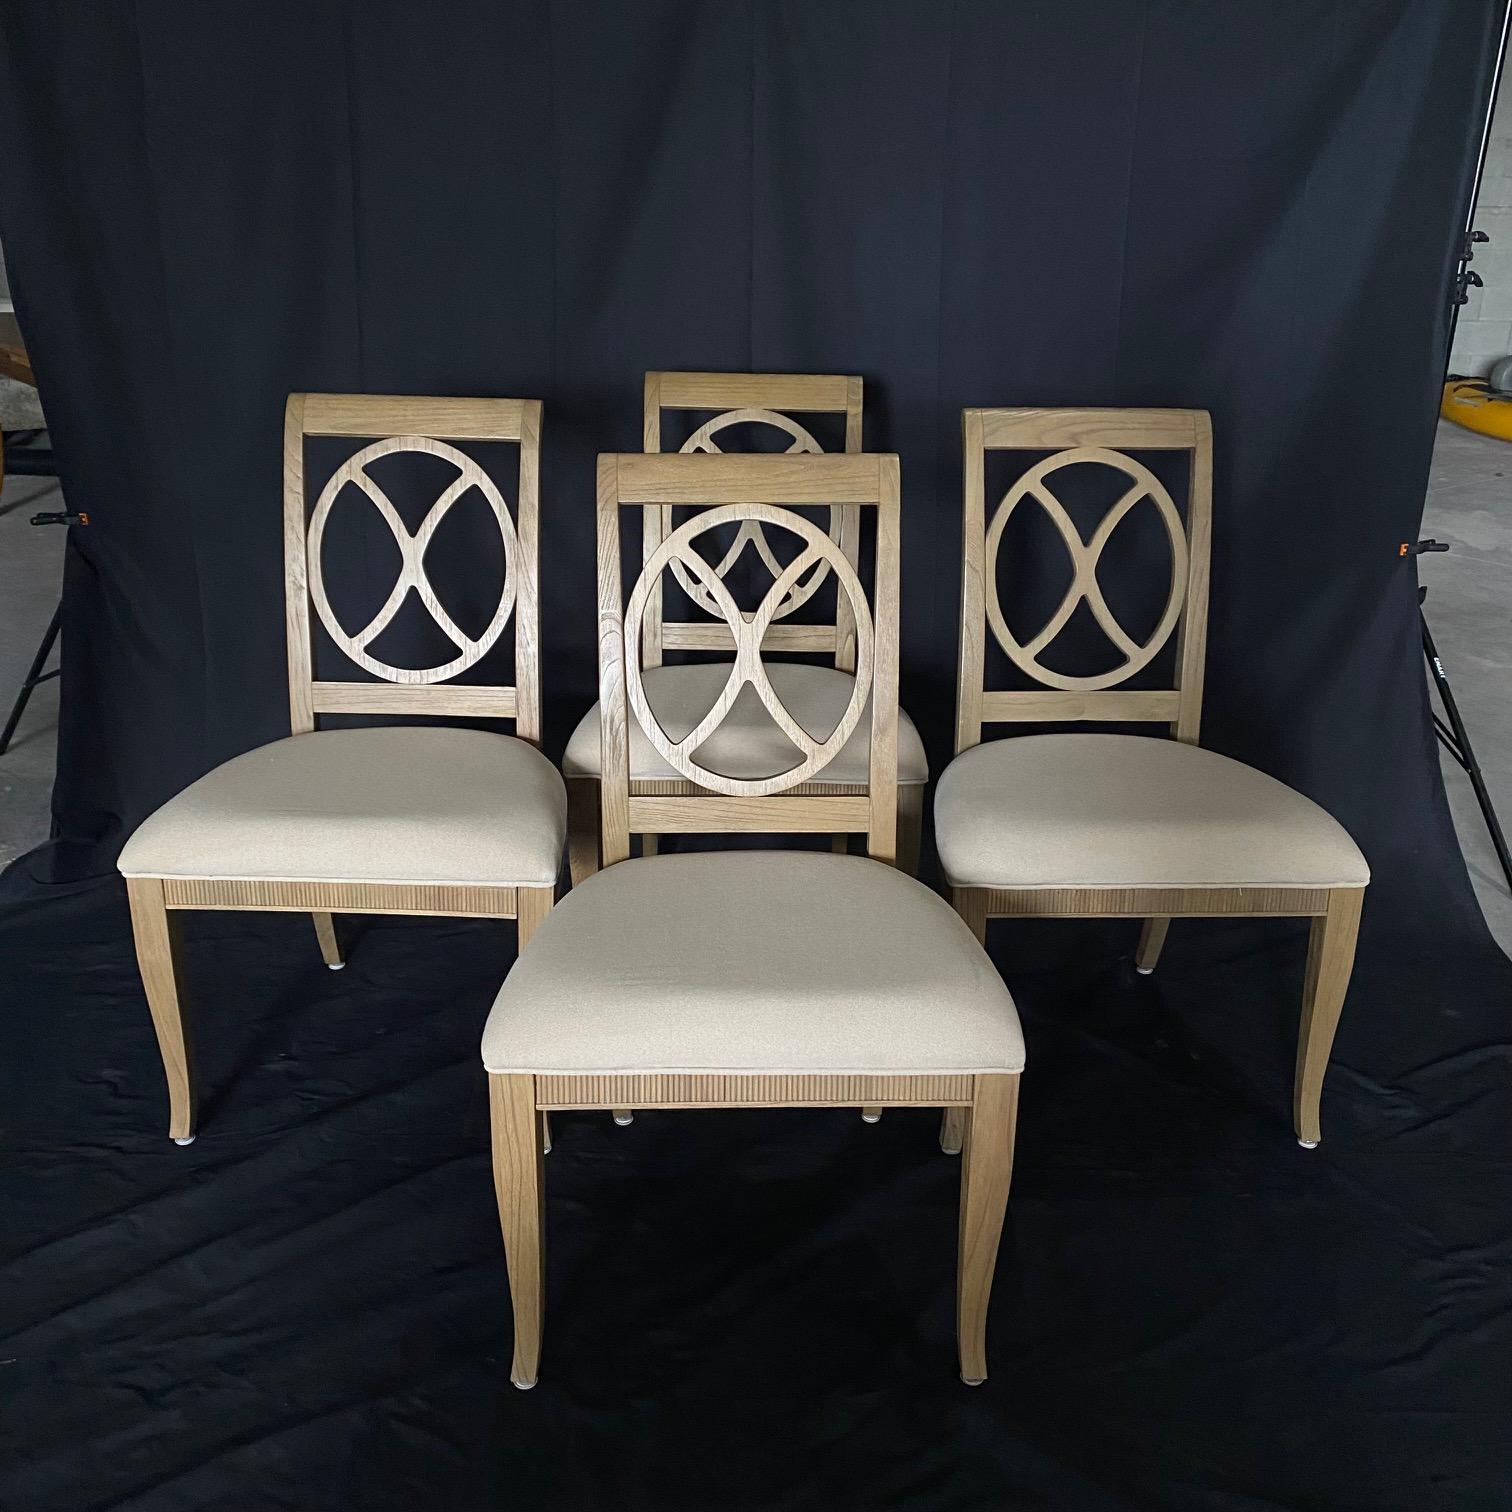 chair with ring on back